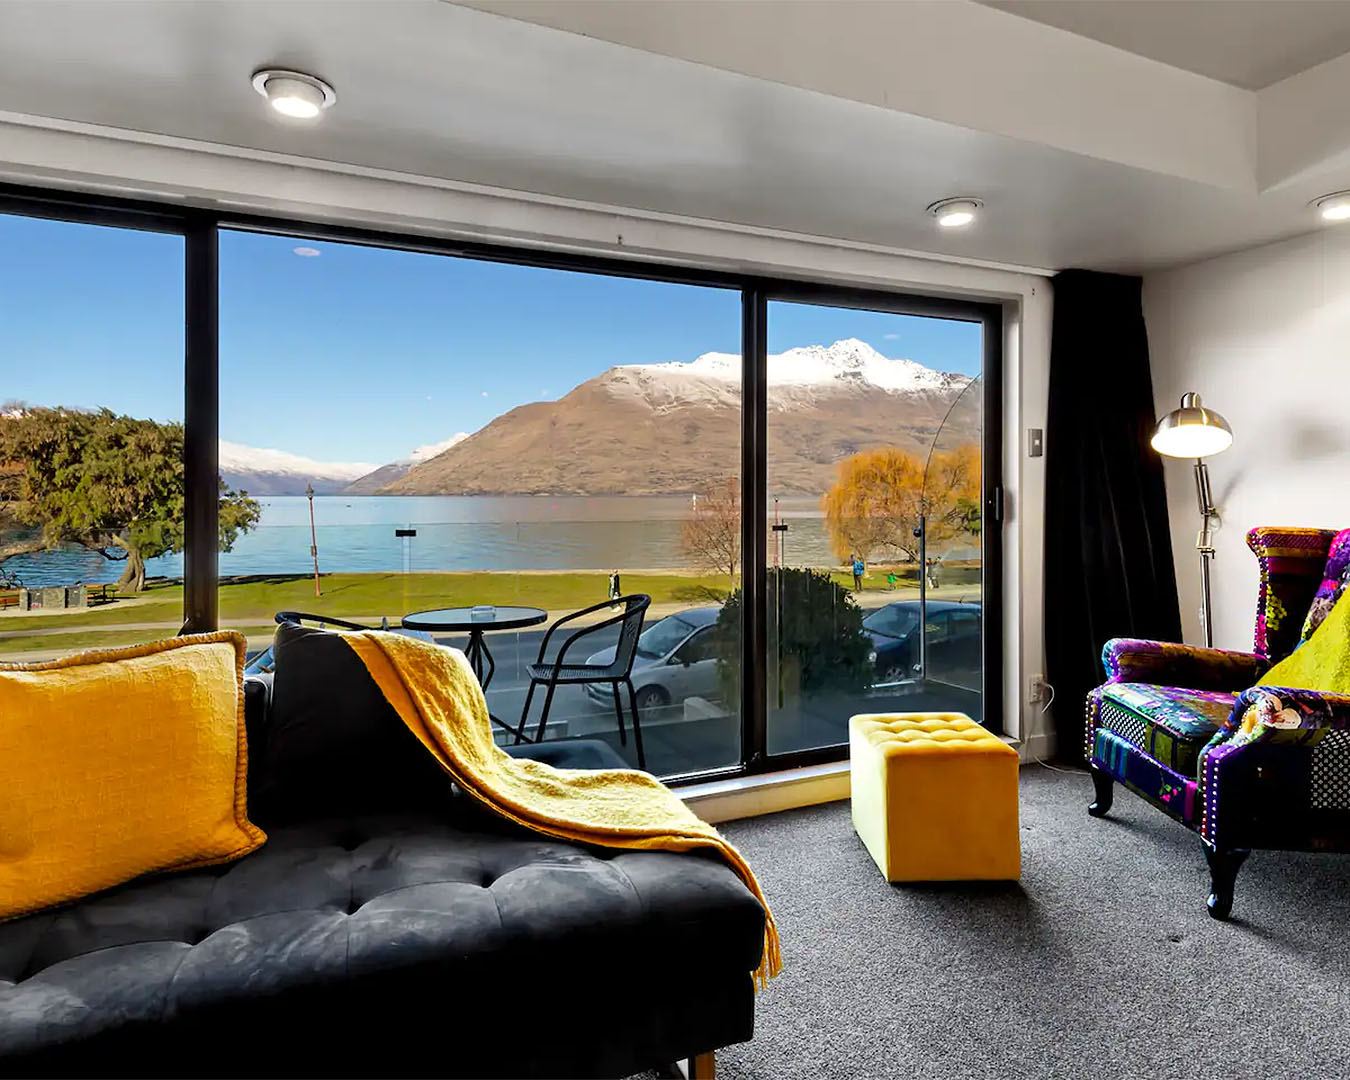 The Tahuna apartment shows a comfortable living room looking out onto a view of mountains and blue water.